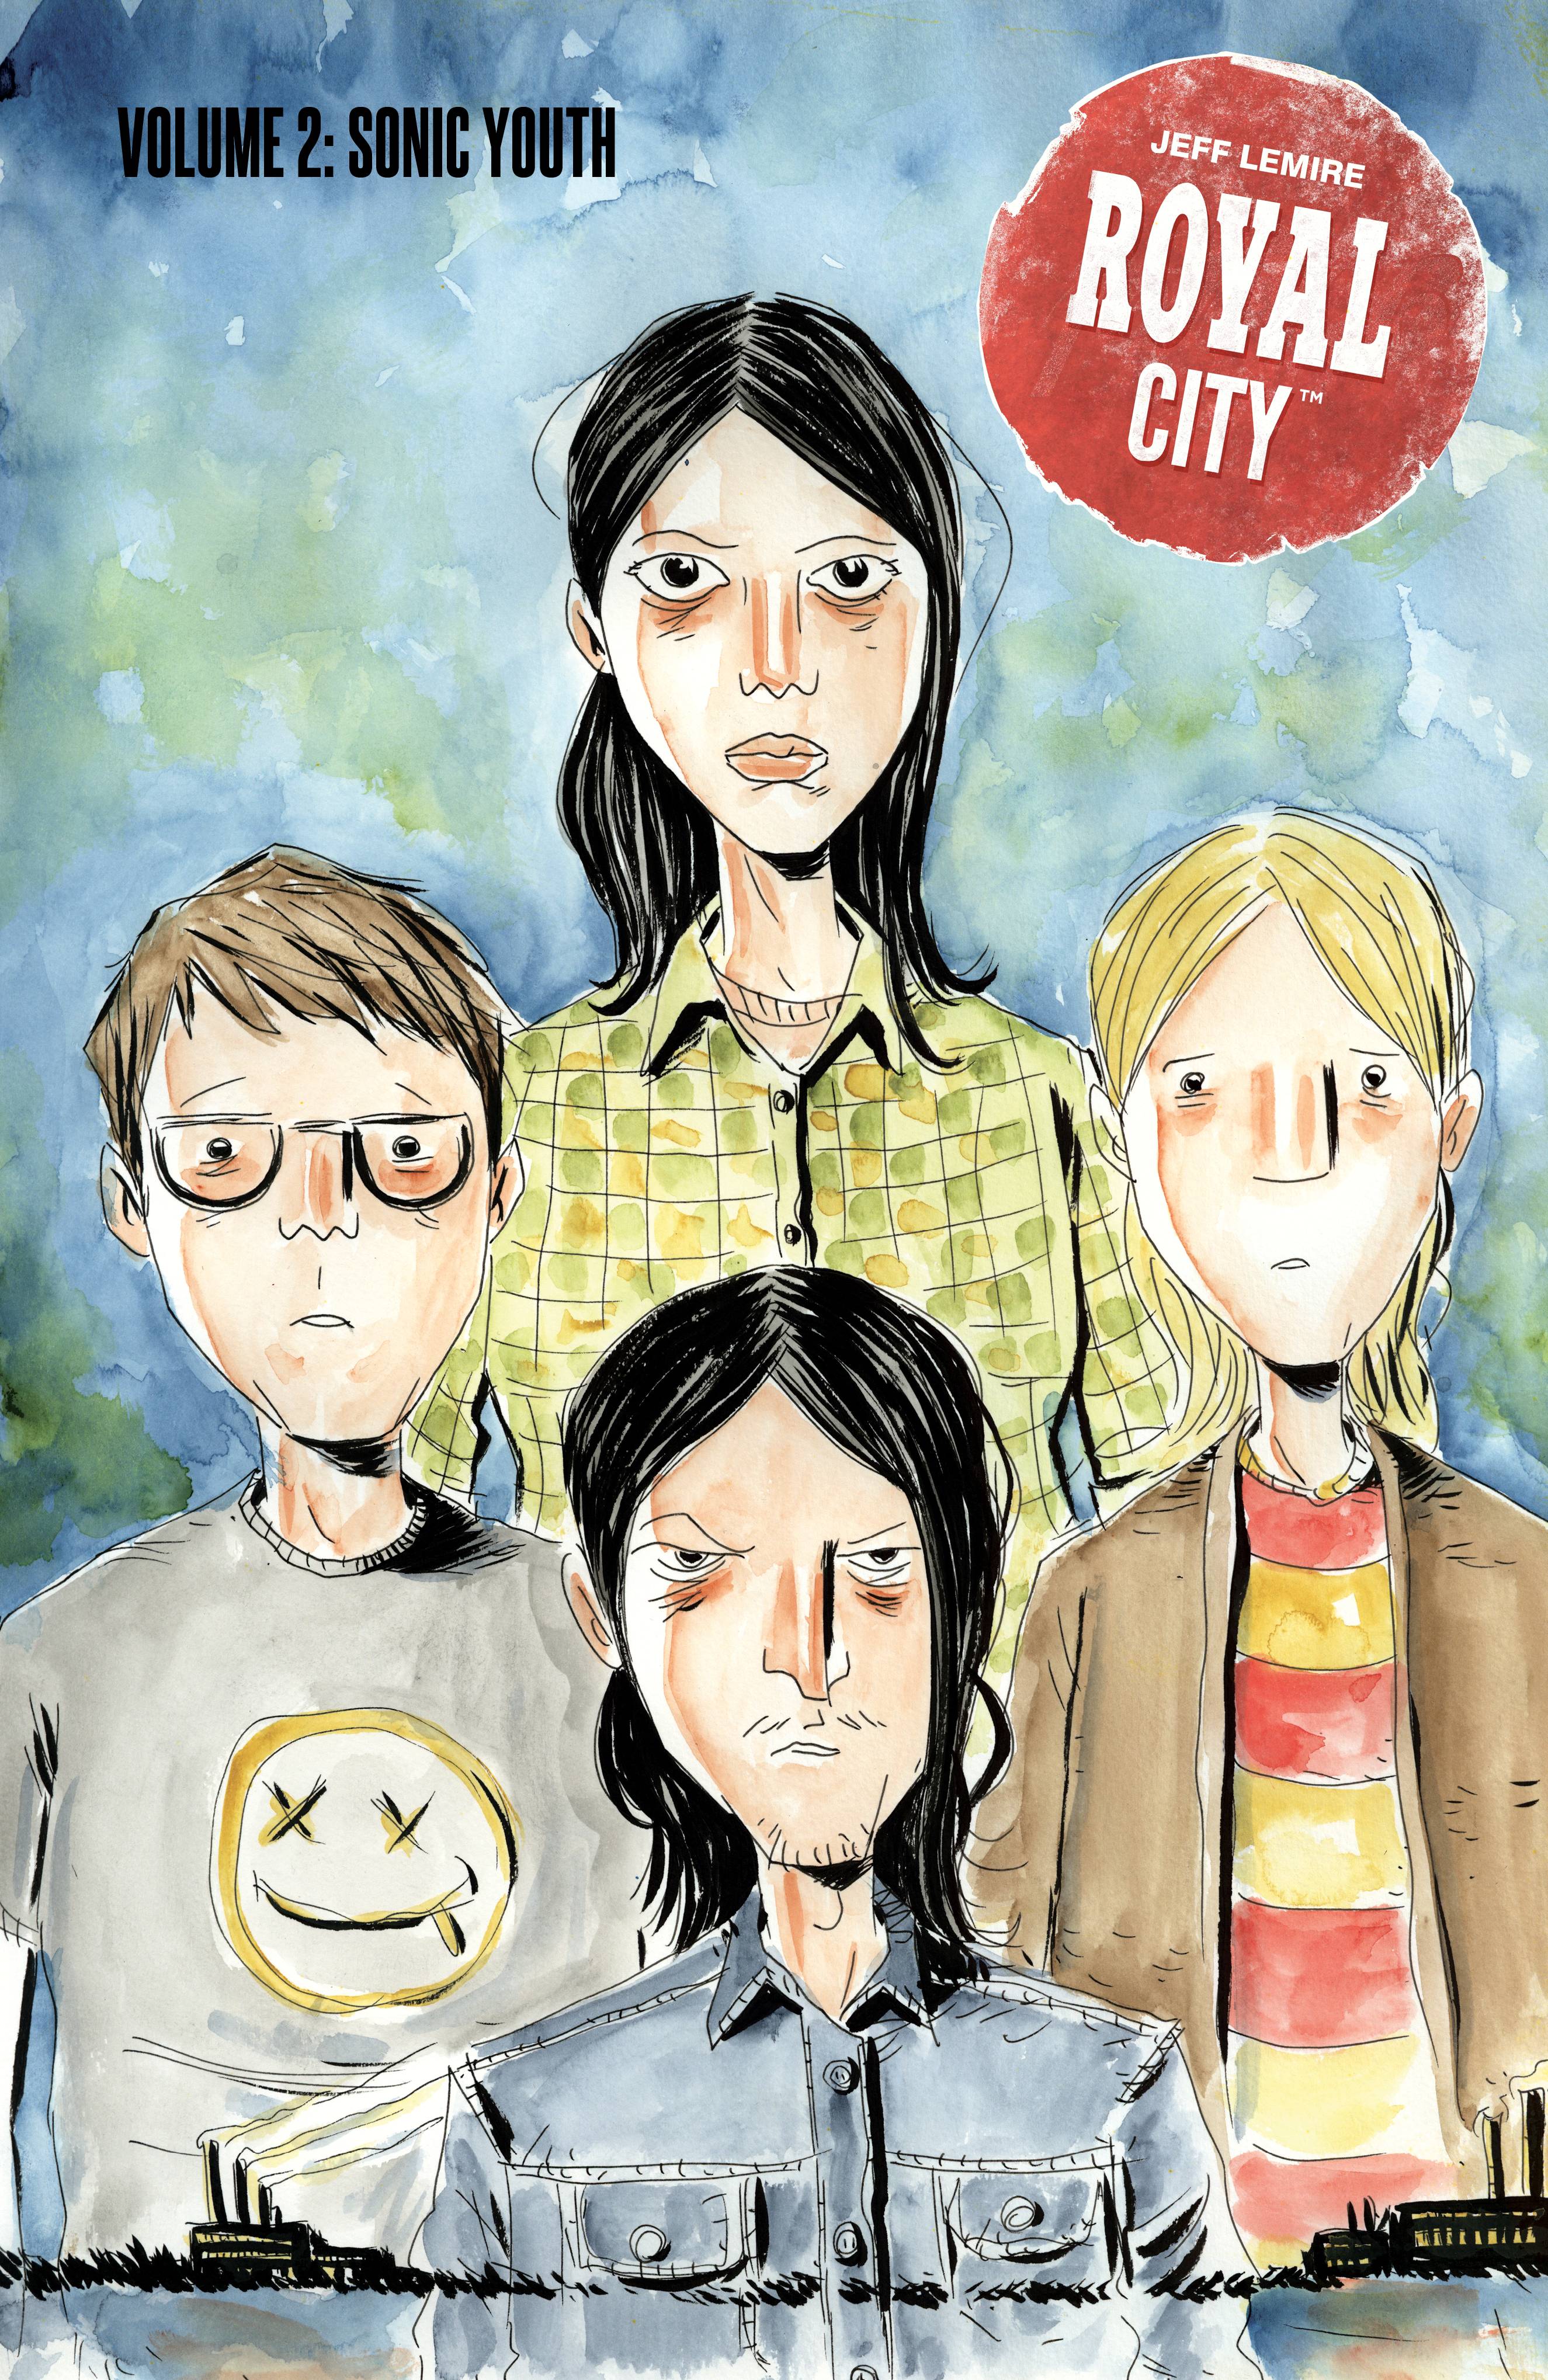 Royal City TP Vol 02 Sonic Youth - State of Comics